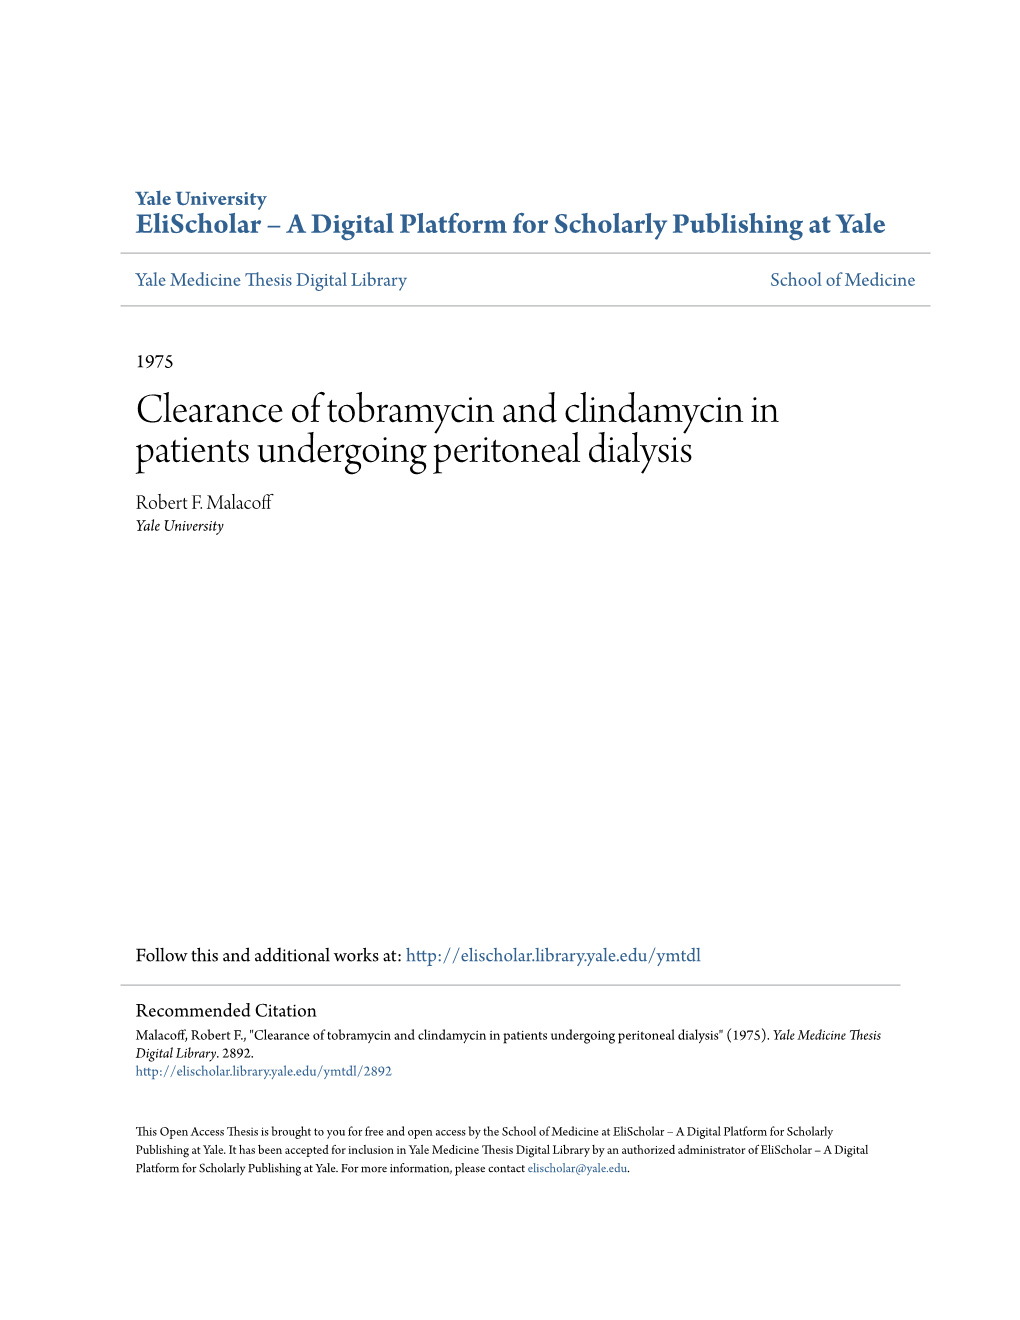 Clearance of Tobramycin and Clindamycin in Patients Undergoing Peritoneal Dialysis Robert F